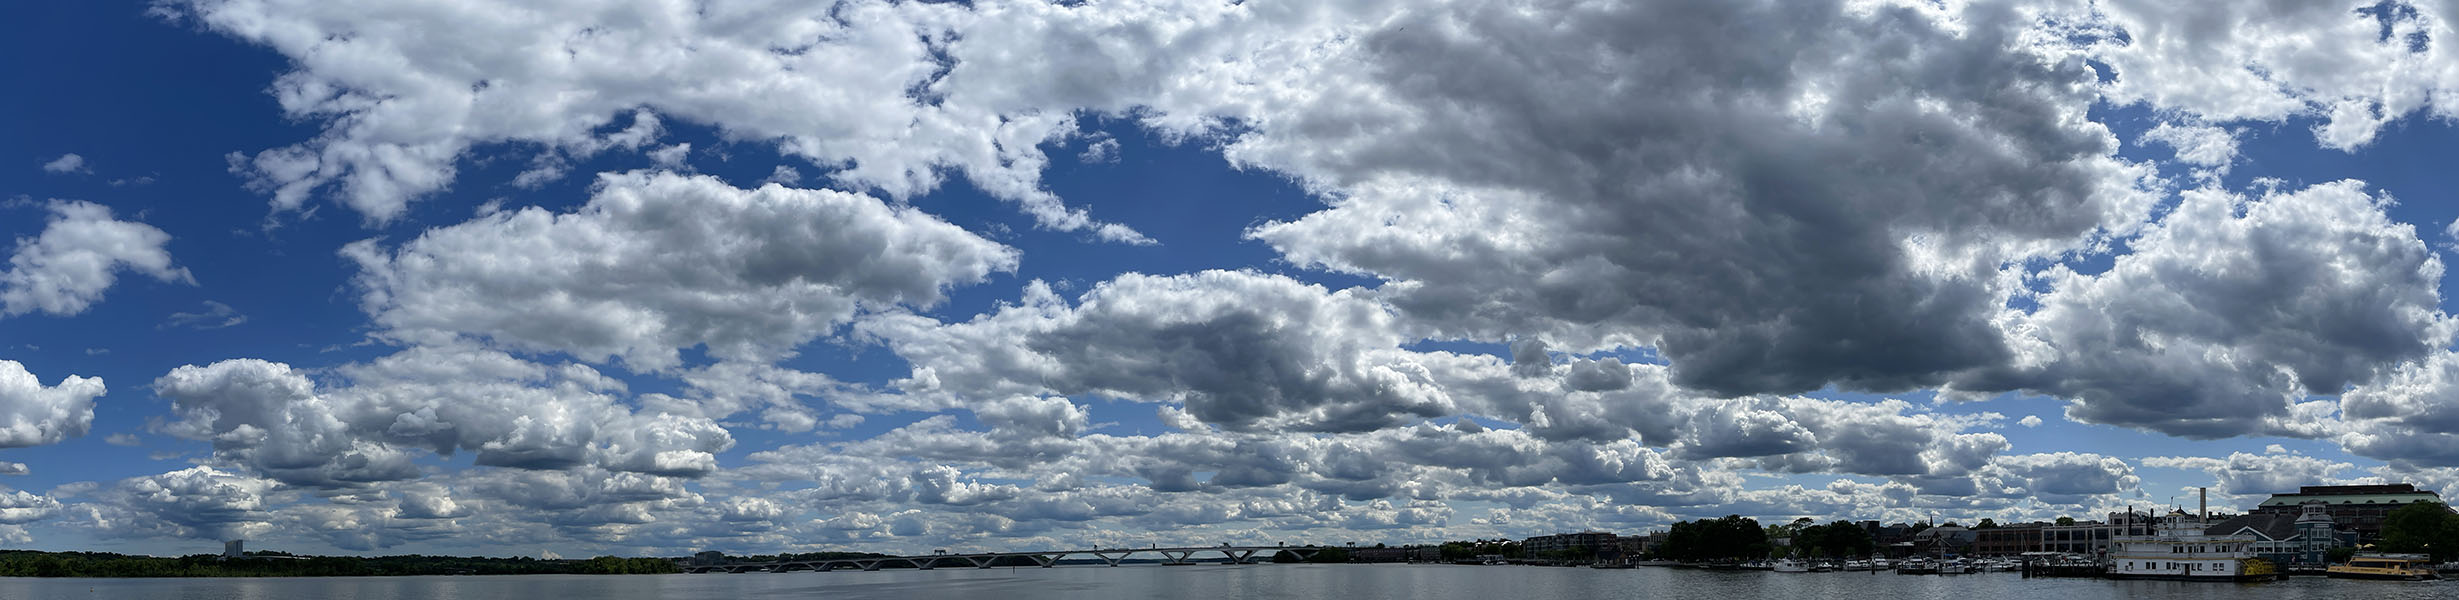 Color Panoramic Photo of River, Mostly Sky with Many Clouds.